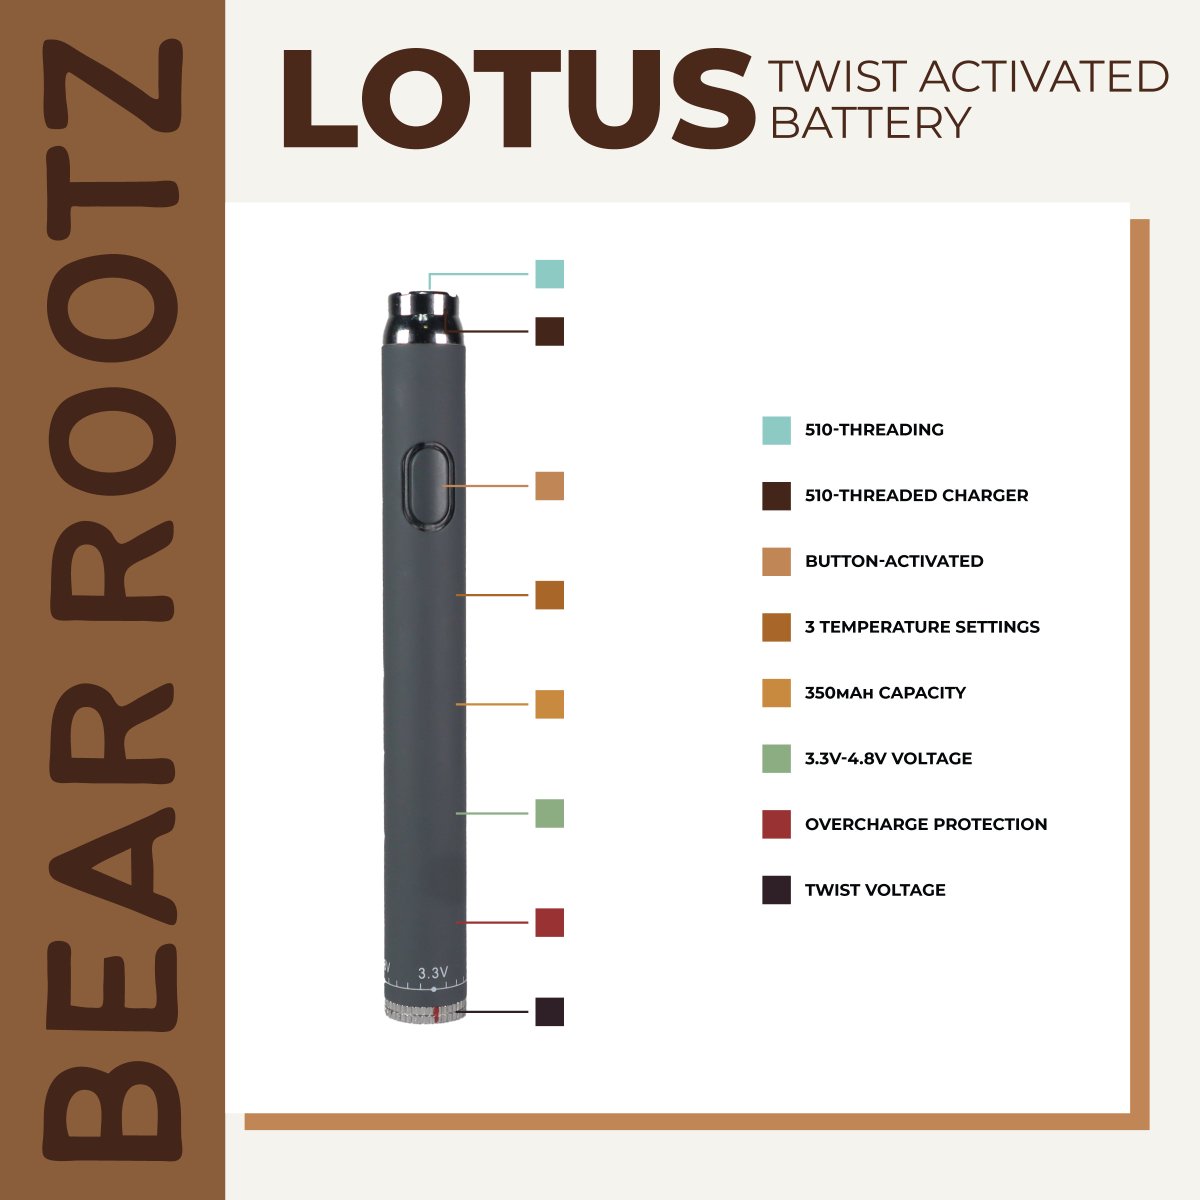 It's time to level up from your standard battery with the Lotus
Twist Variable Voltage
Button-Activated
3.3V-4.8V Voltage
350 mAh Battery
📦Customizable for your brand

bearrootz.com/product/lotus-…

#vapebattery #customvape #customvapebattery #cartridgevape #vaporizertechnology